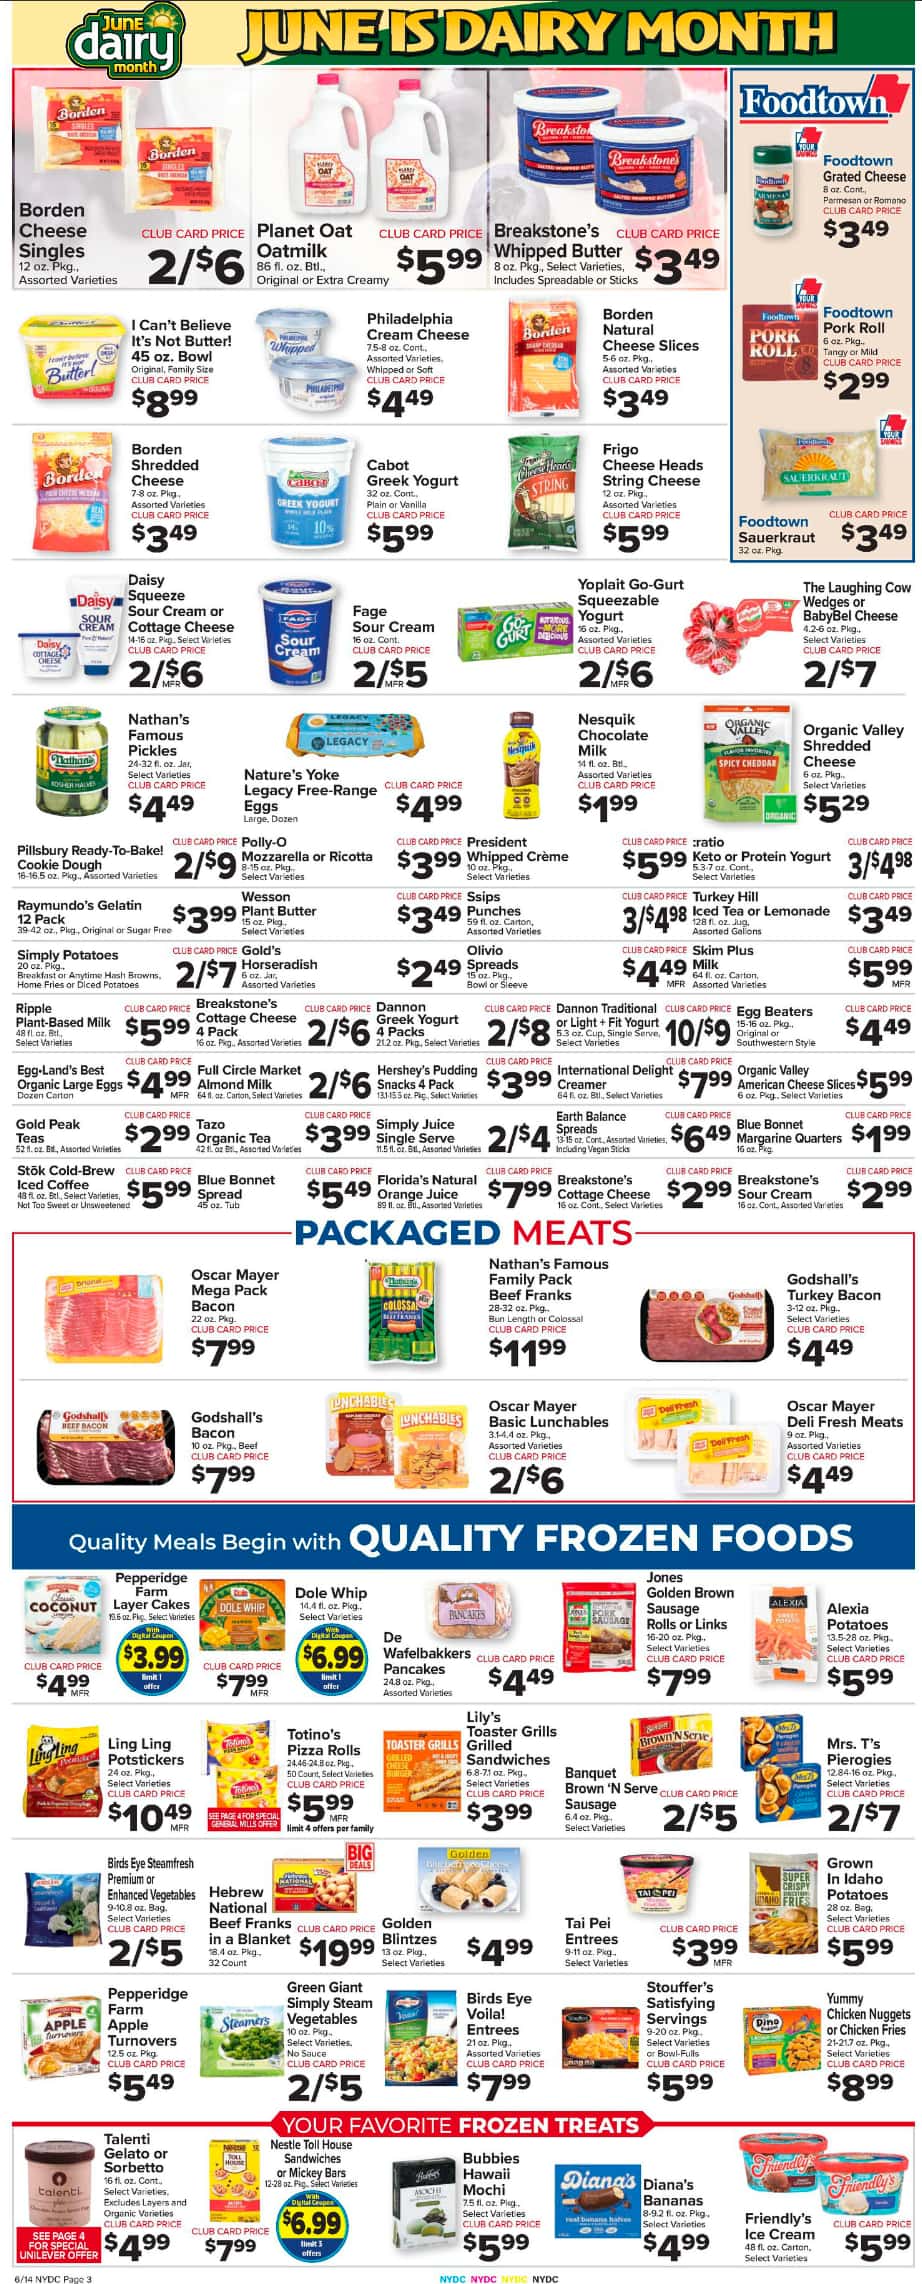 Foodtown Weekly Ad July 2024 Weekly Sales, Deals, Discounts and Digital Coupons.